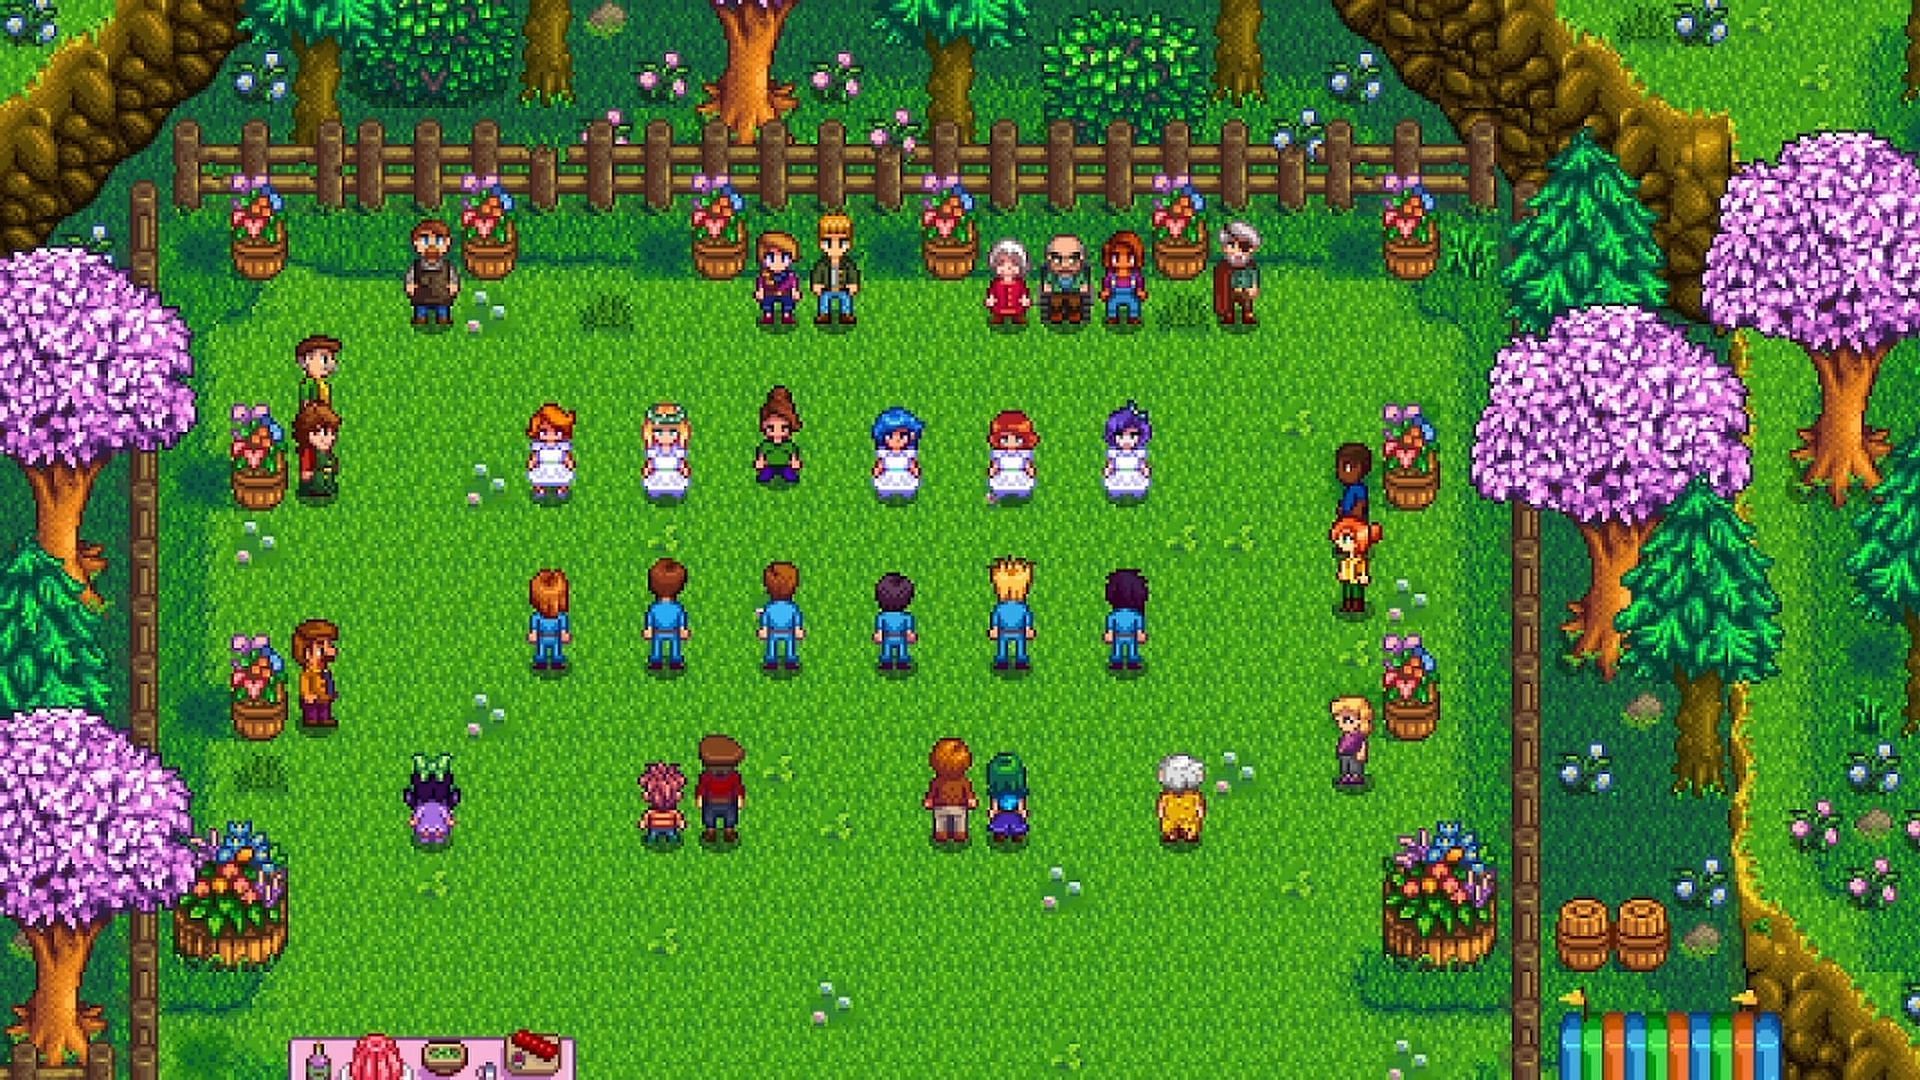 The Stardew Valley Flower Dance is one one of the major events in the game (Image via ConcernedApe II Cozy Bird Gaming on YouTube)